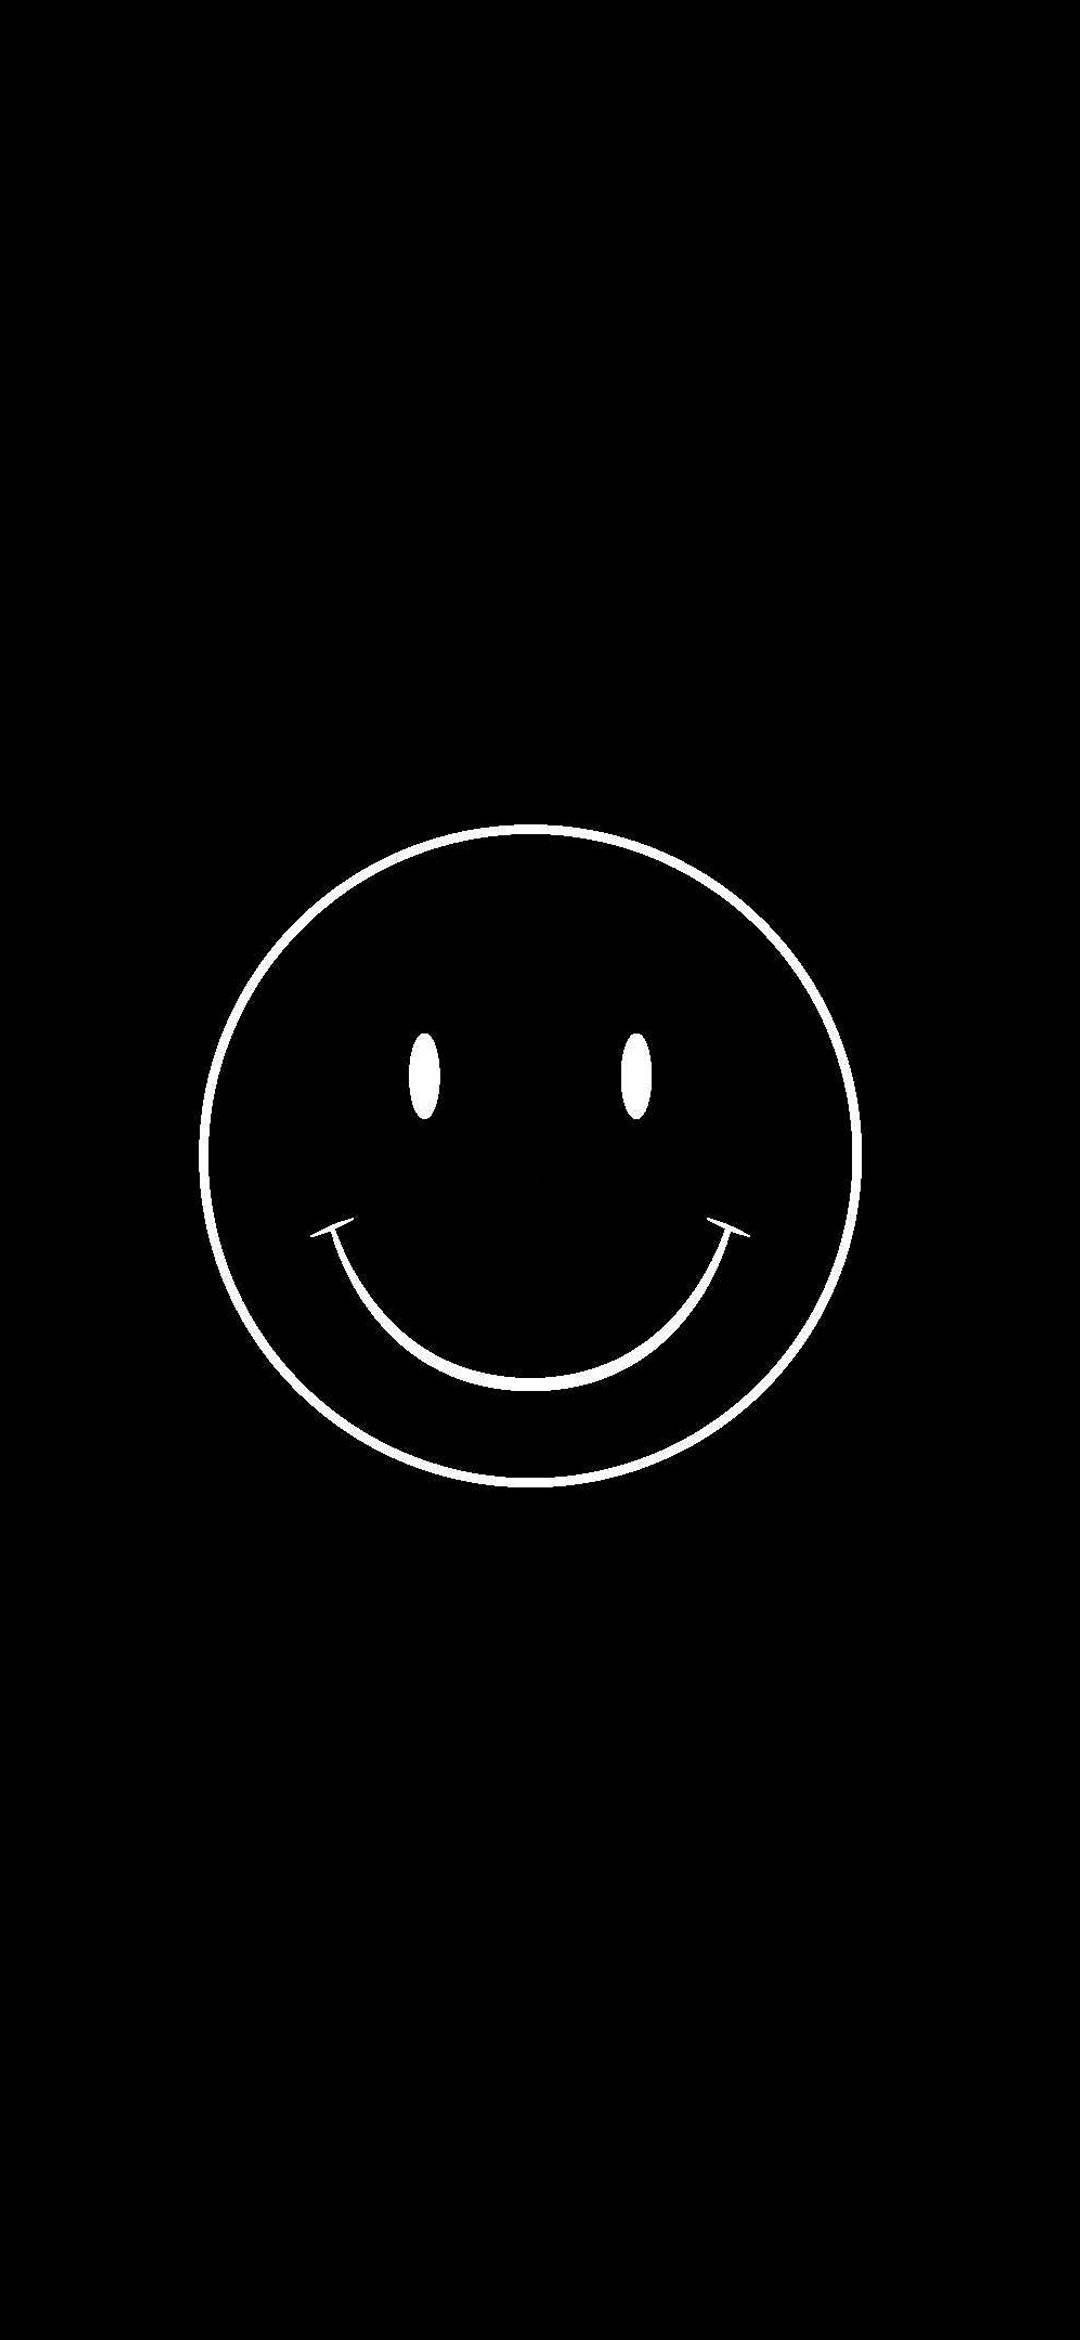 Download Minimalist Smiley Face In Black Background Wallpaper ...